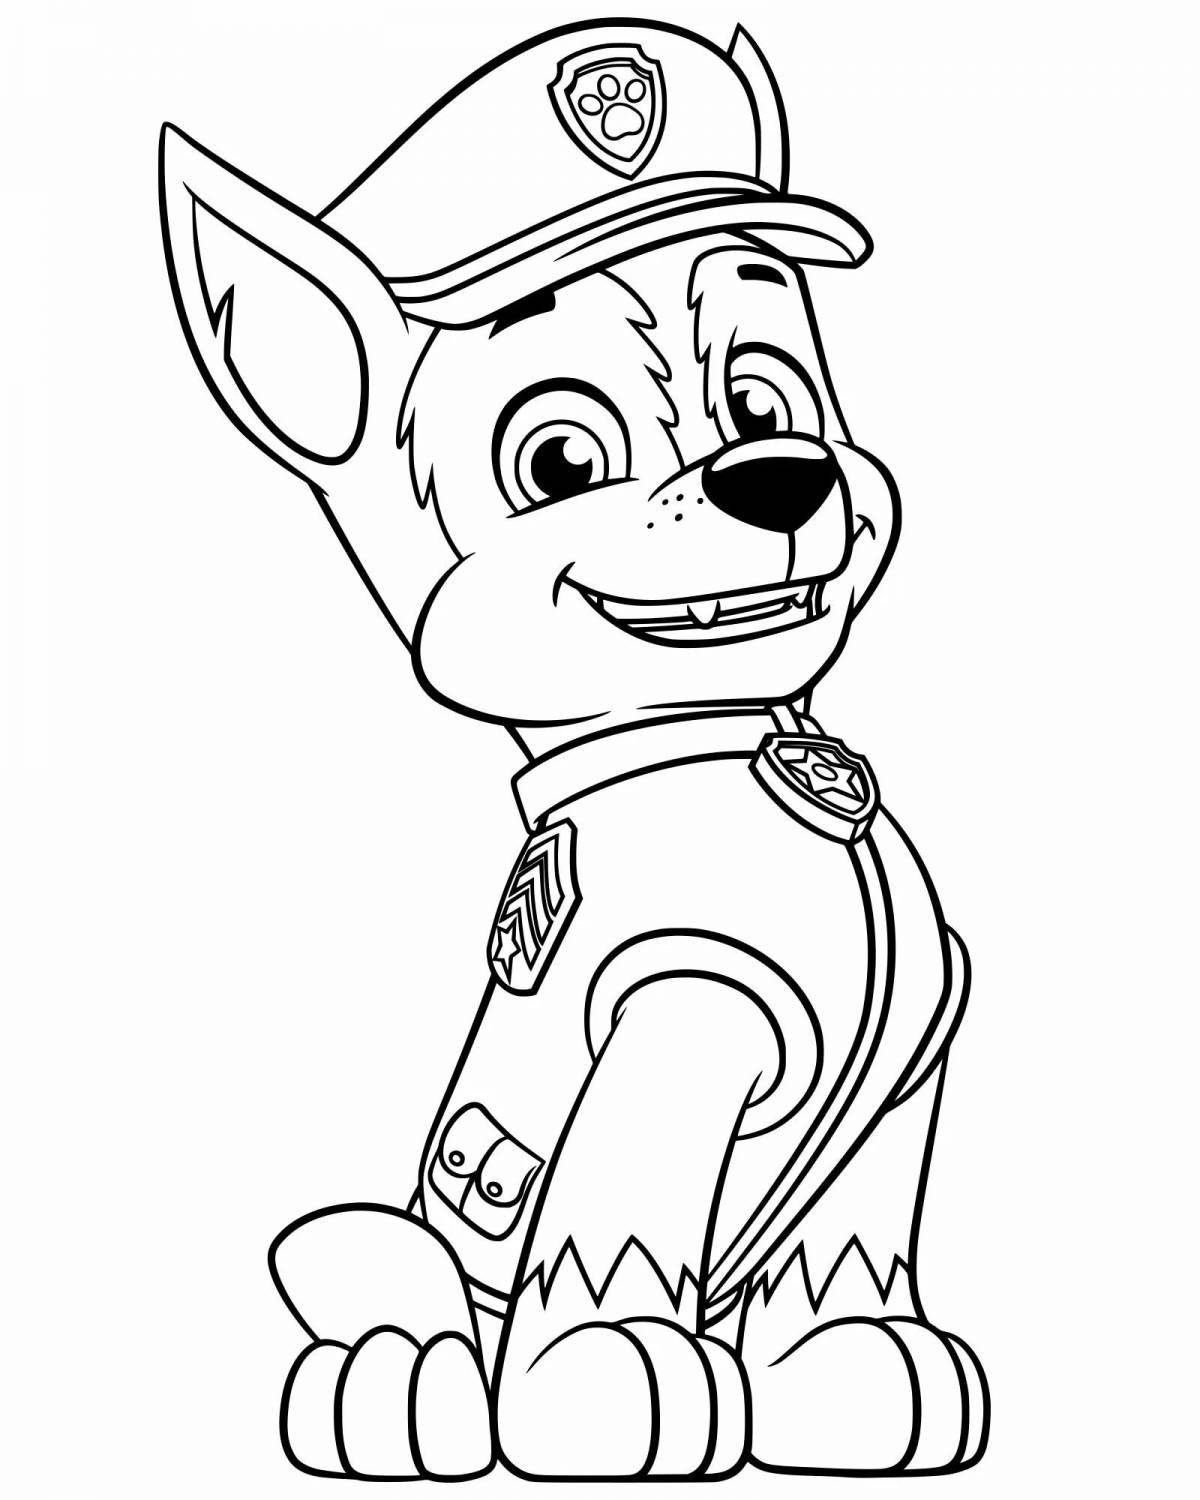 Coloring page energetic racer for kids